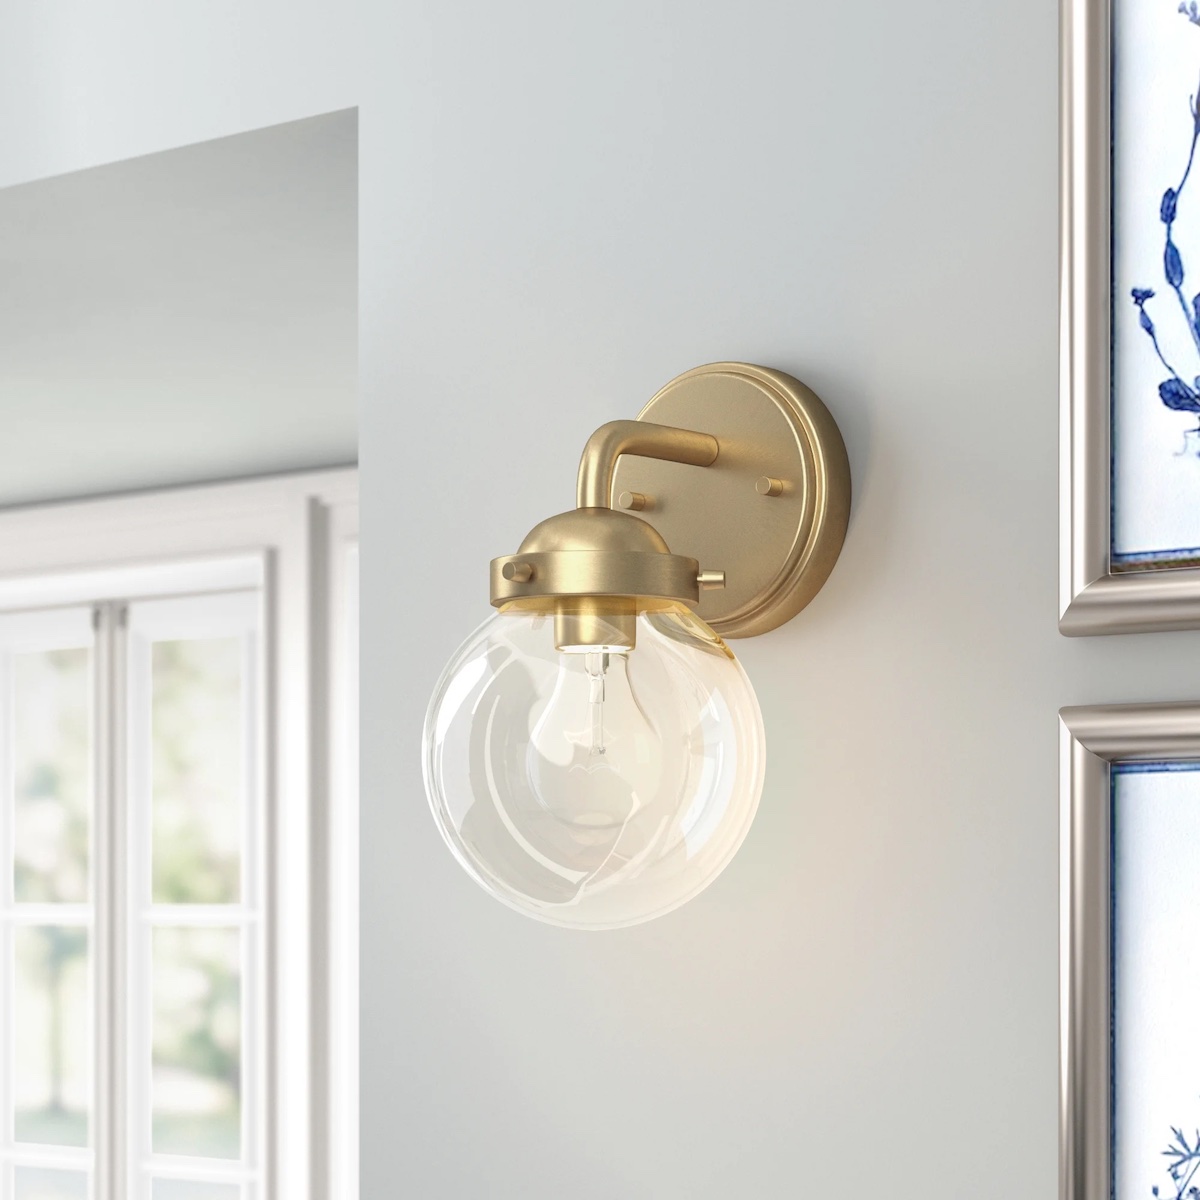 Brushed gold sconce with a glass globe fixture attached to a round metal plate.